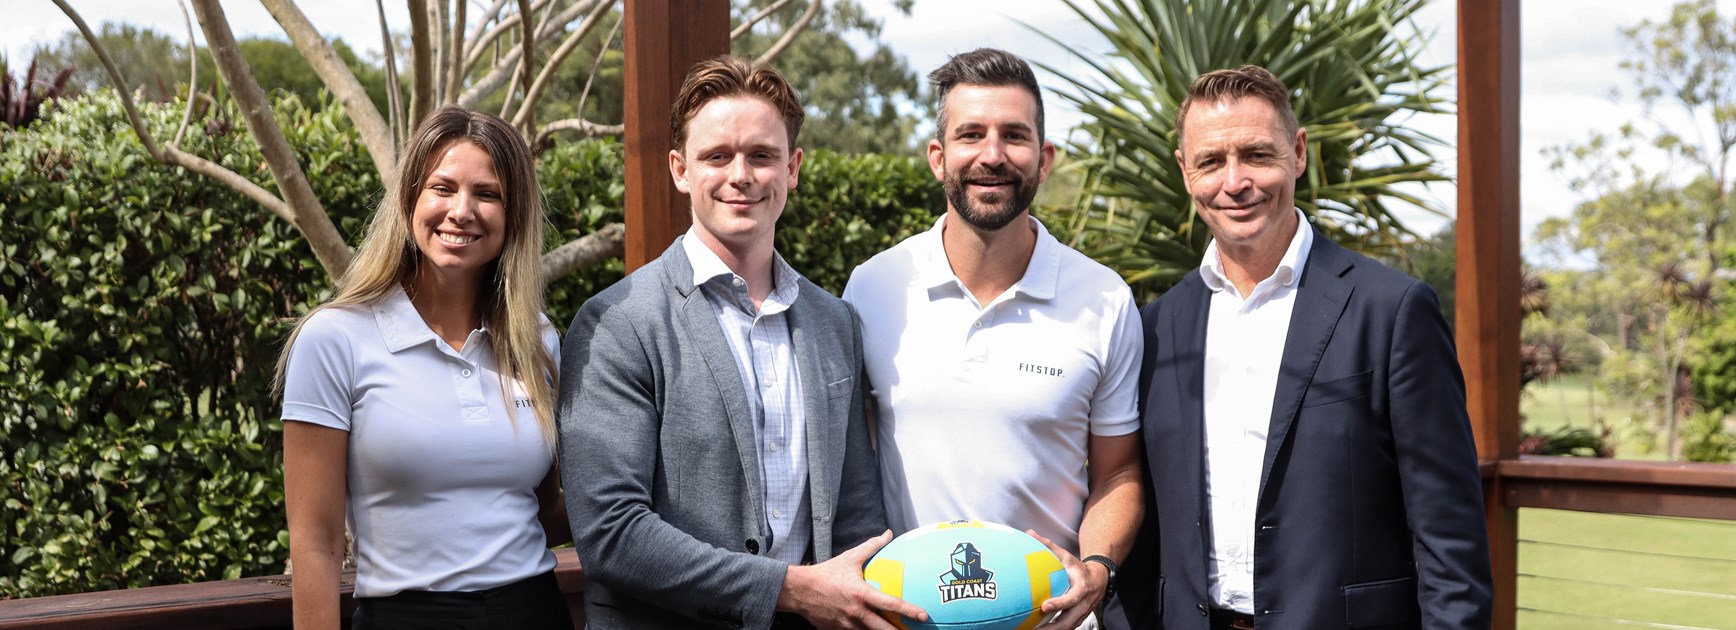 Fitstop to lift Titans to new heights in 2022